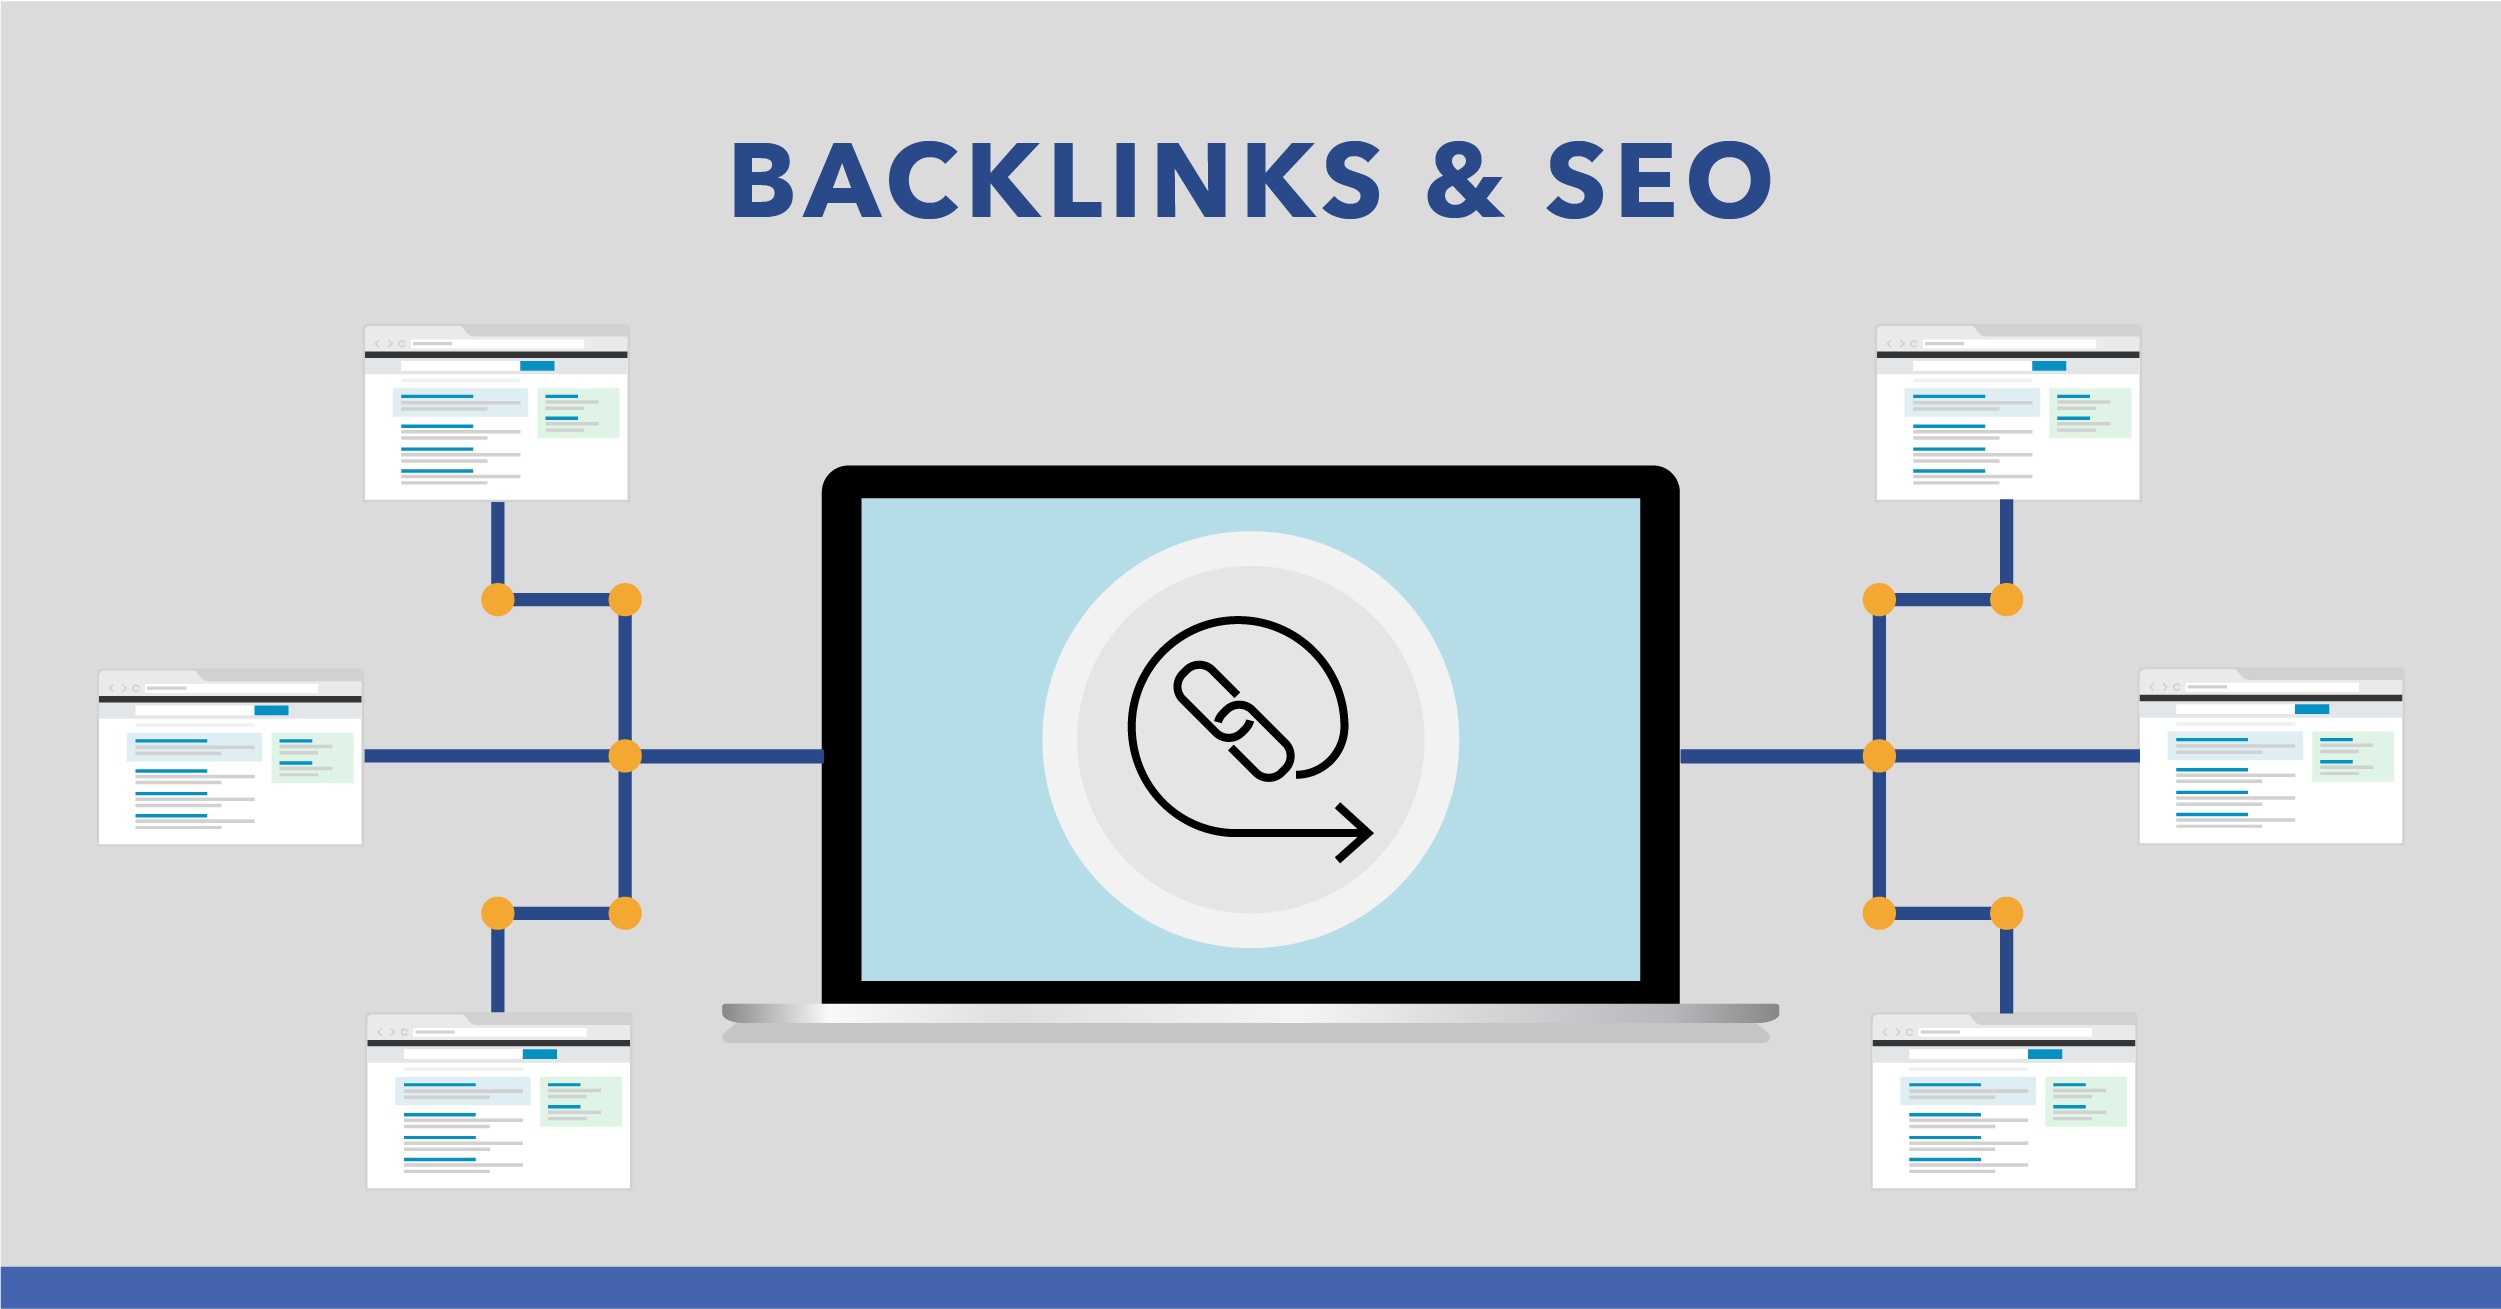 Buy backlinks to boost SEO